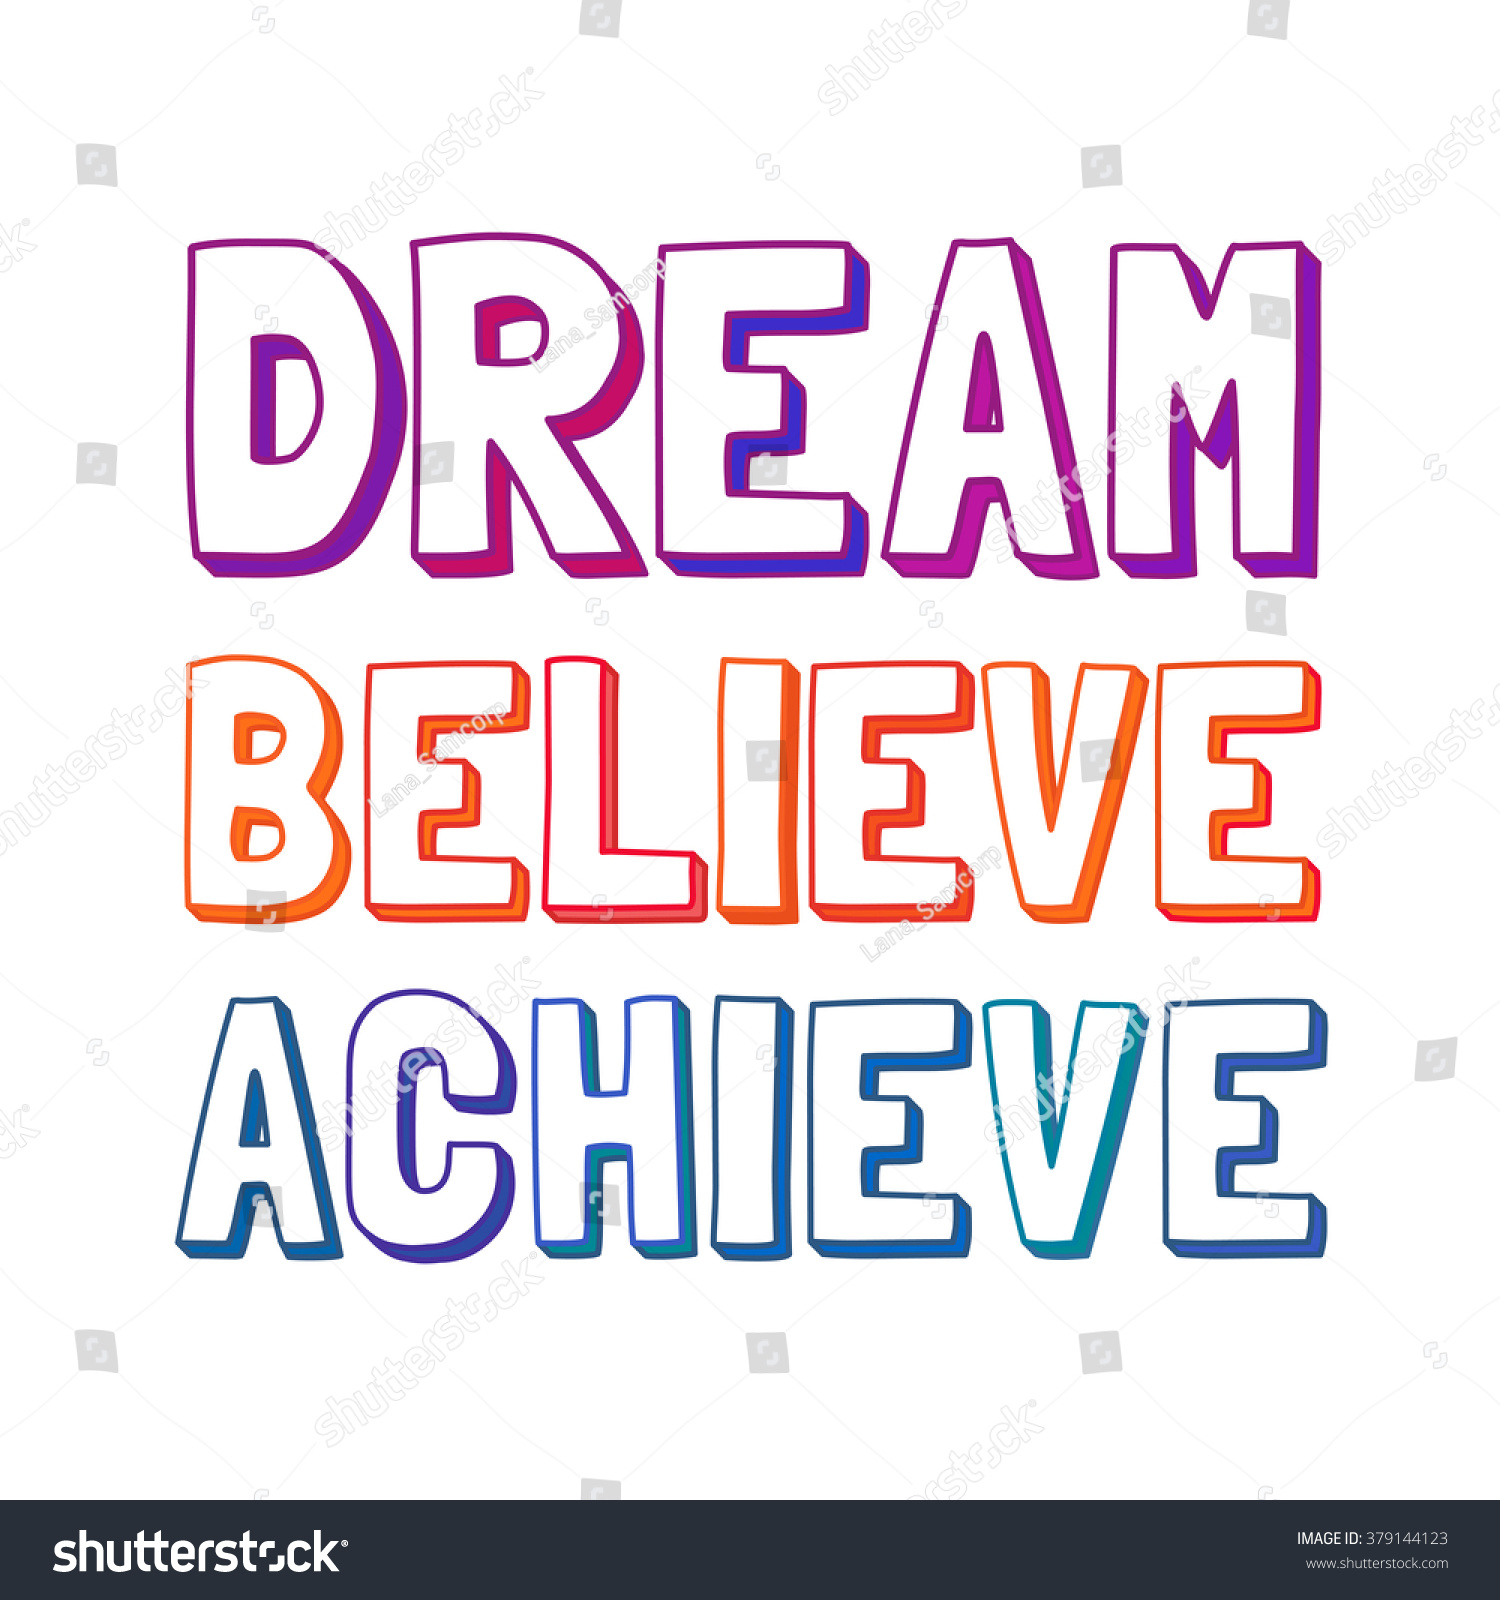 Download Inspiration Motivated Quote Dream Believe Achieve Stock ...